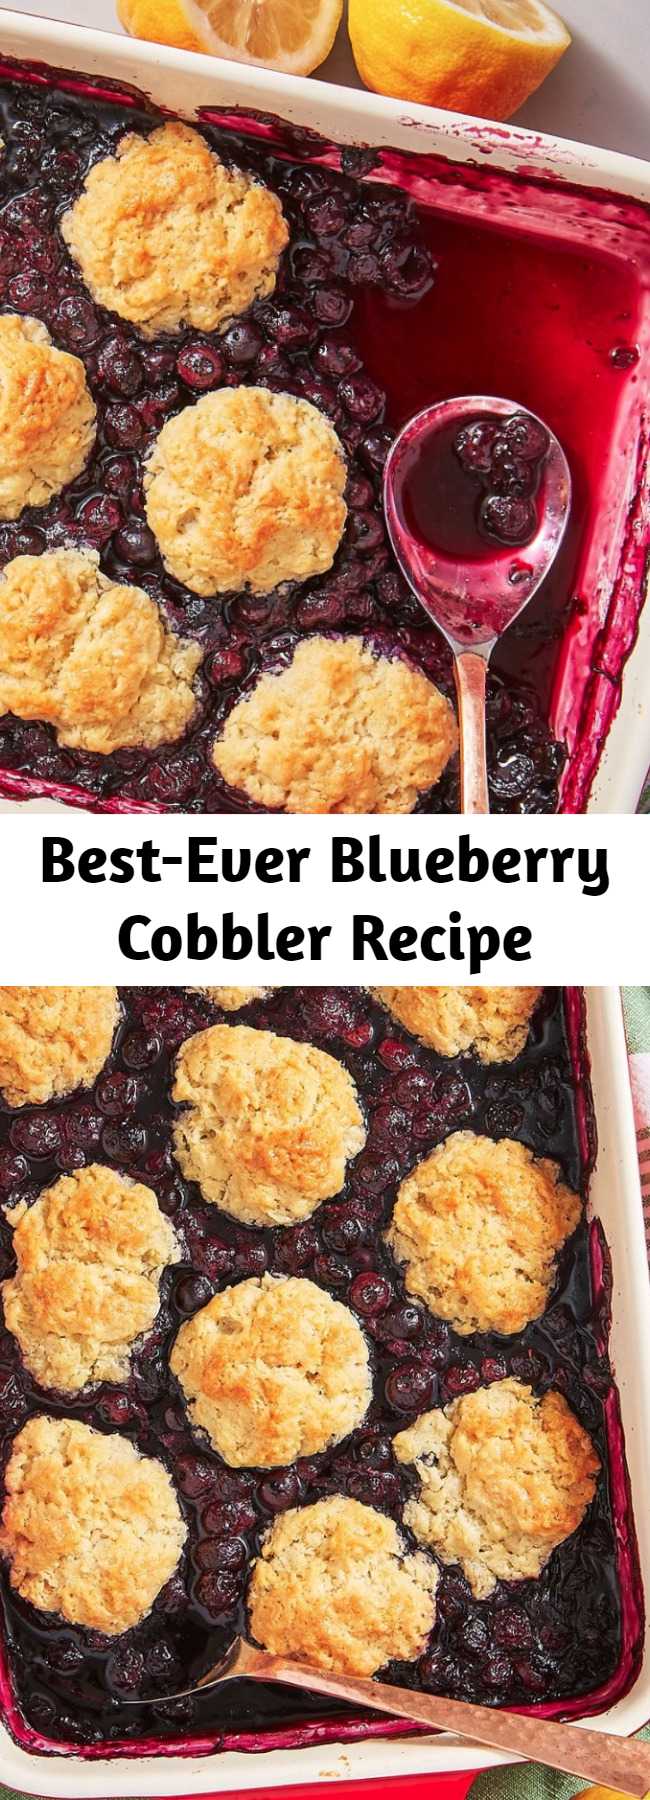 Best-Ever Blueberry Cobbler Recipe - This easy blueberry cobbler recipe is all about the biscuit topping! Not too sweet, super-tender, with a crisp golden top. If we could, we'd eat them all first.